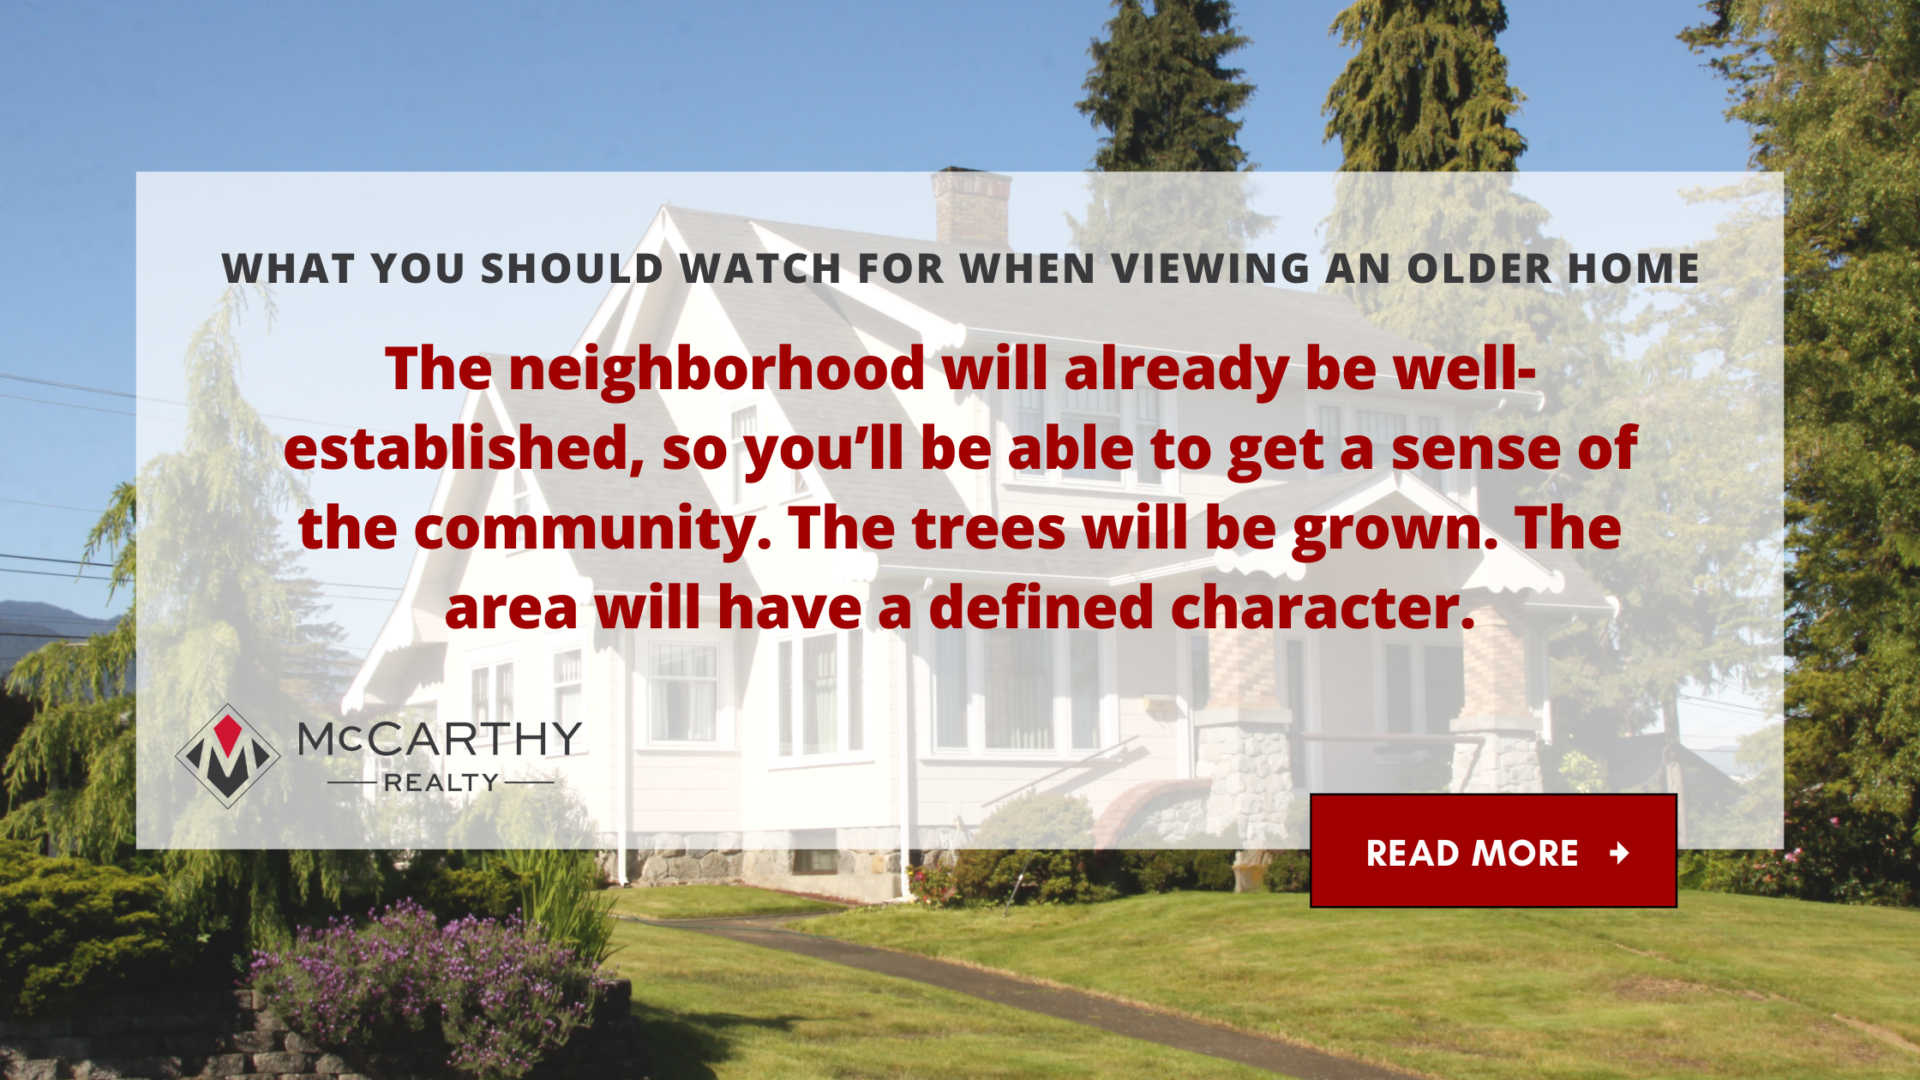 What You Should Watch for When Viewing an Older Home